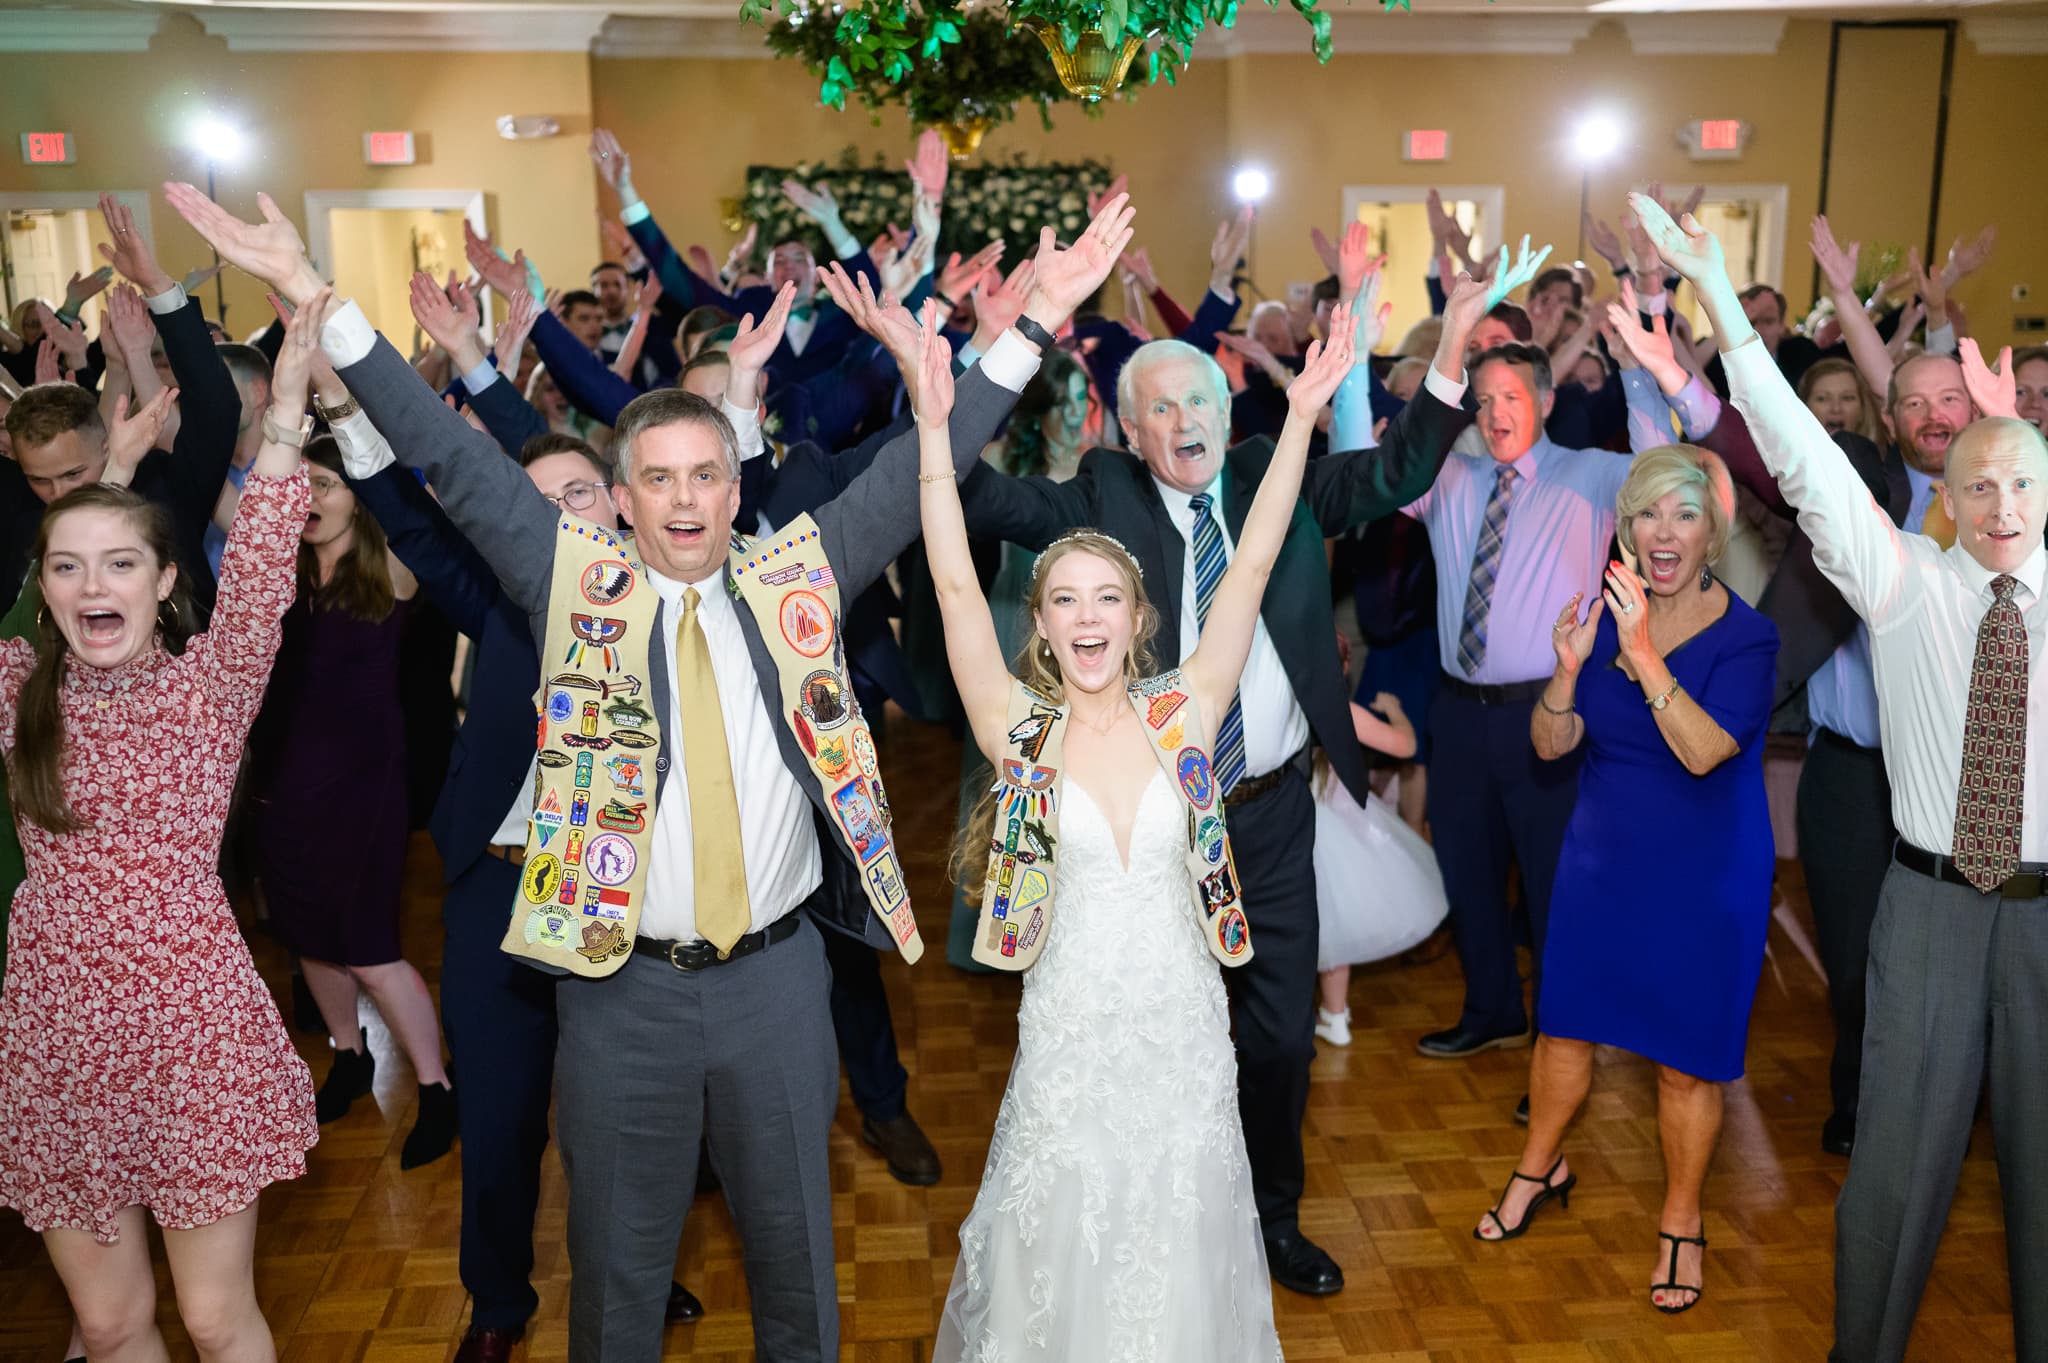 Everyone on the dance floor with father daughter dance - Pawleys Plantation Golf & Country Club